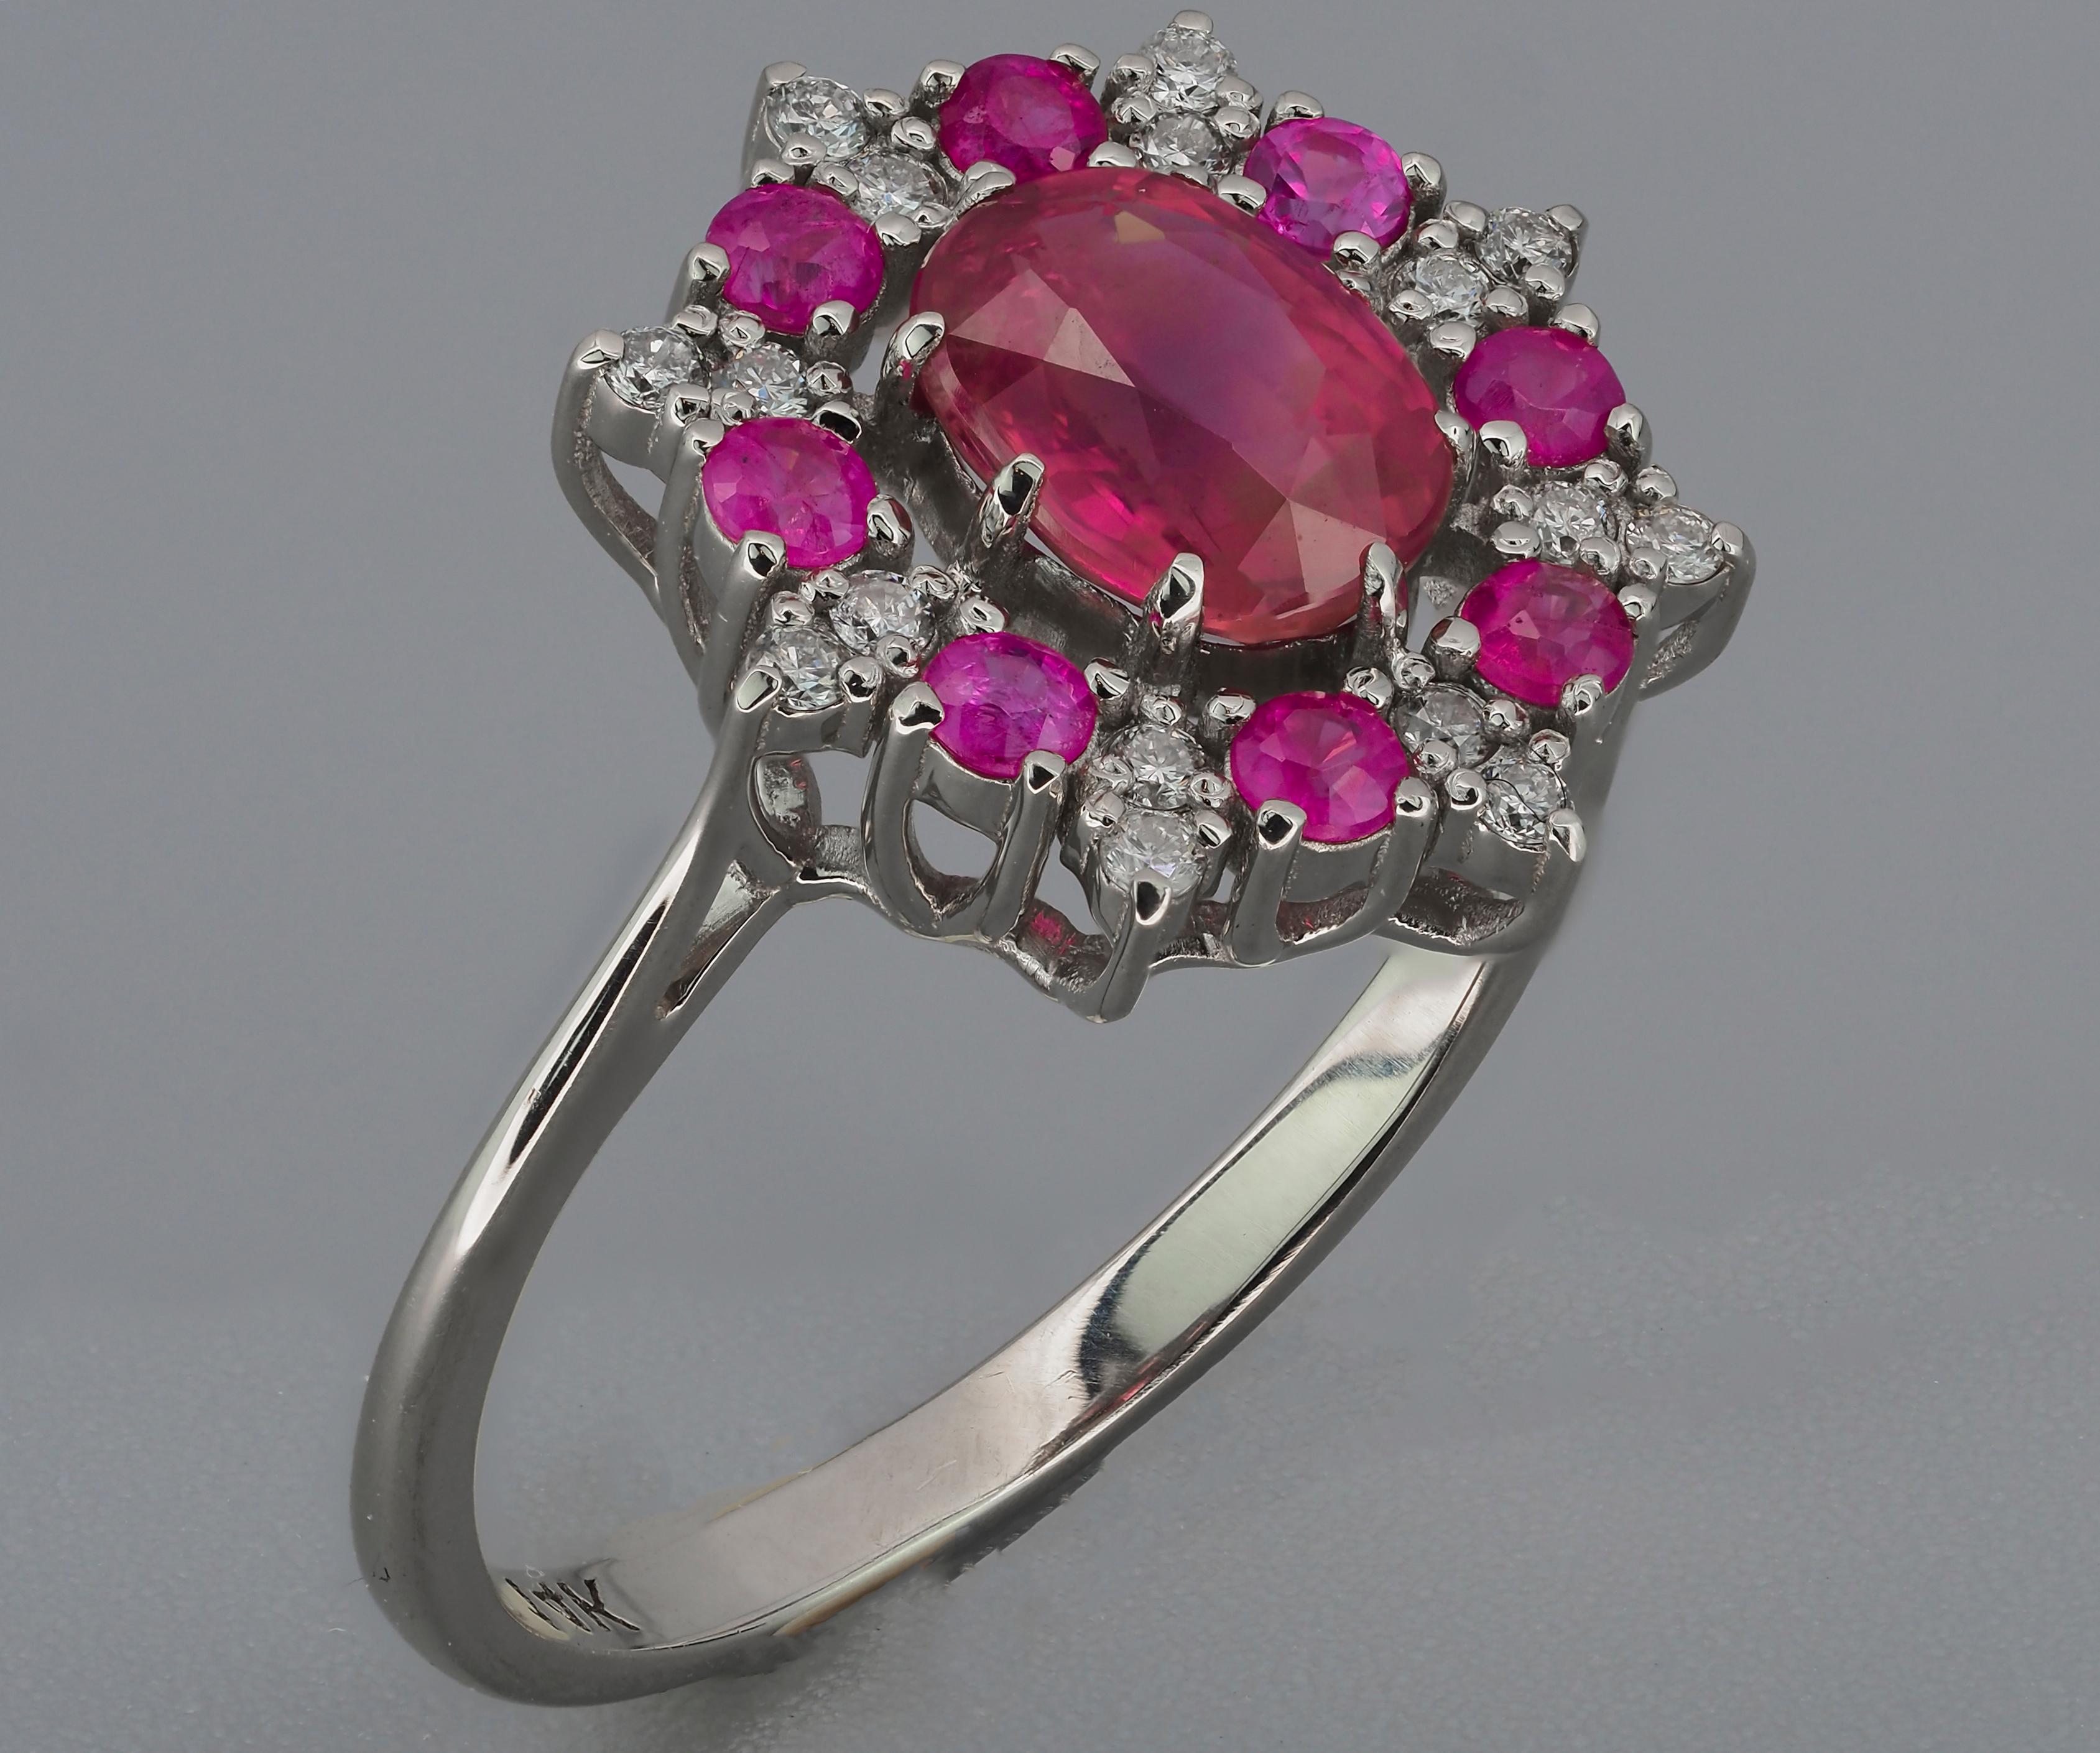 For Sale:  14 karat Gold Ring with Ruby and Diamonds. Snowflake Gold Ring 10